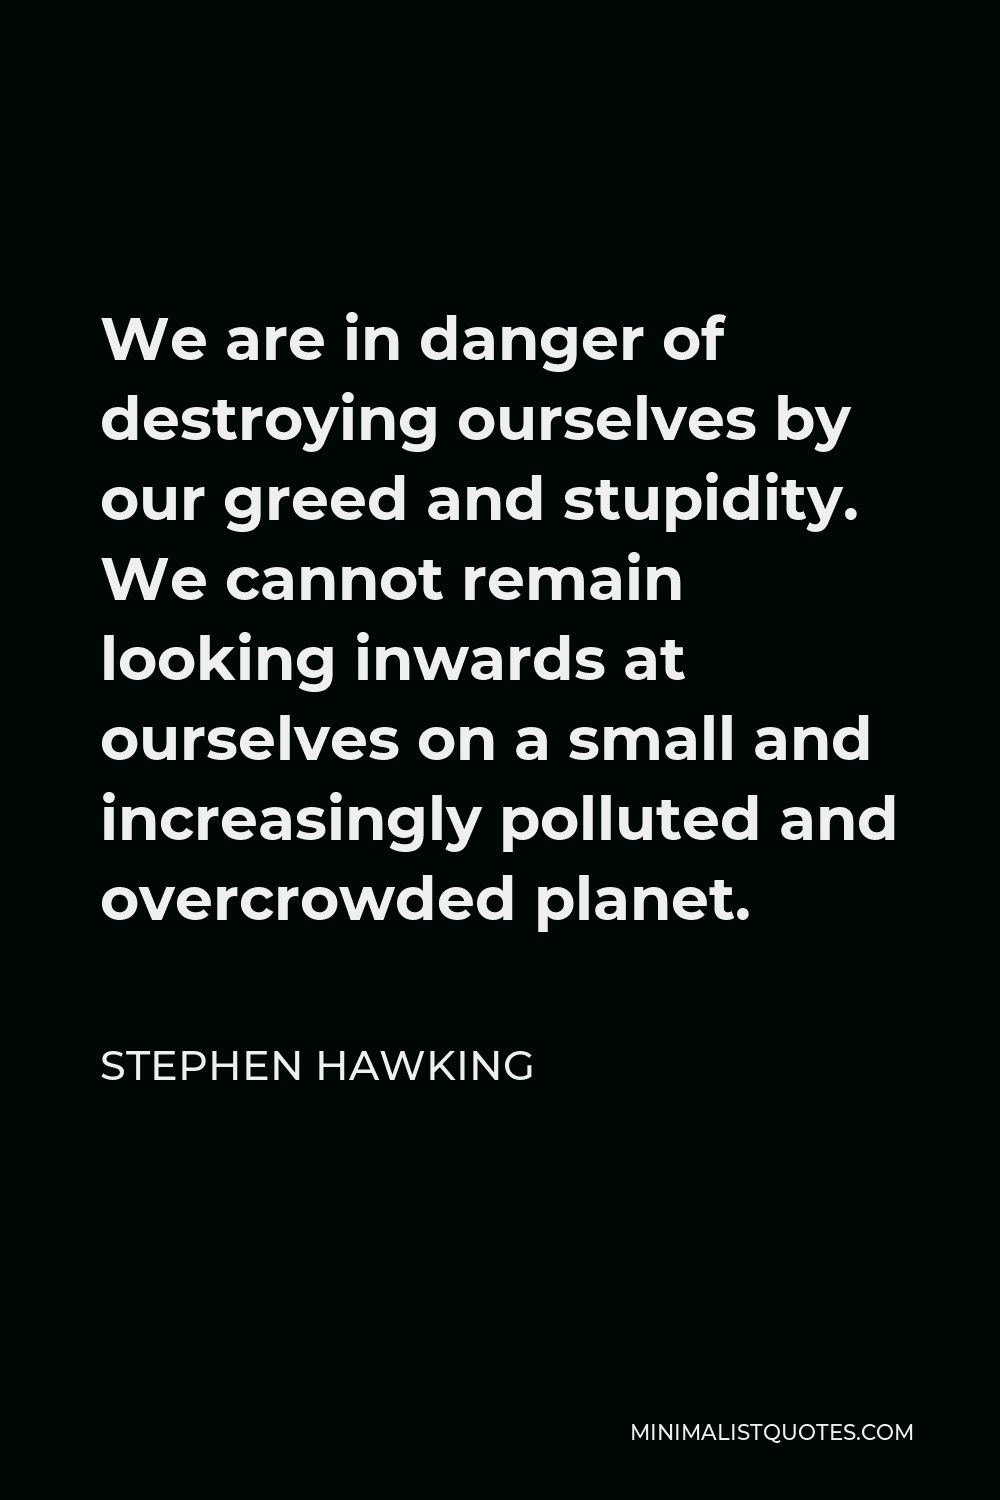 Stephen Hawking Quote - We are in danger of destroying ourselves by our greed and stupidity. We cannot remain looking inwards at ourselves on a small and increasingly polluted and overcrowded planet.